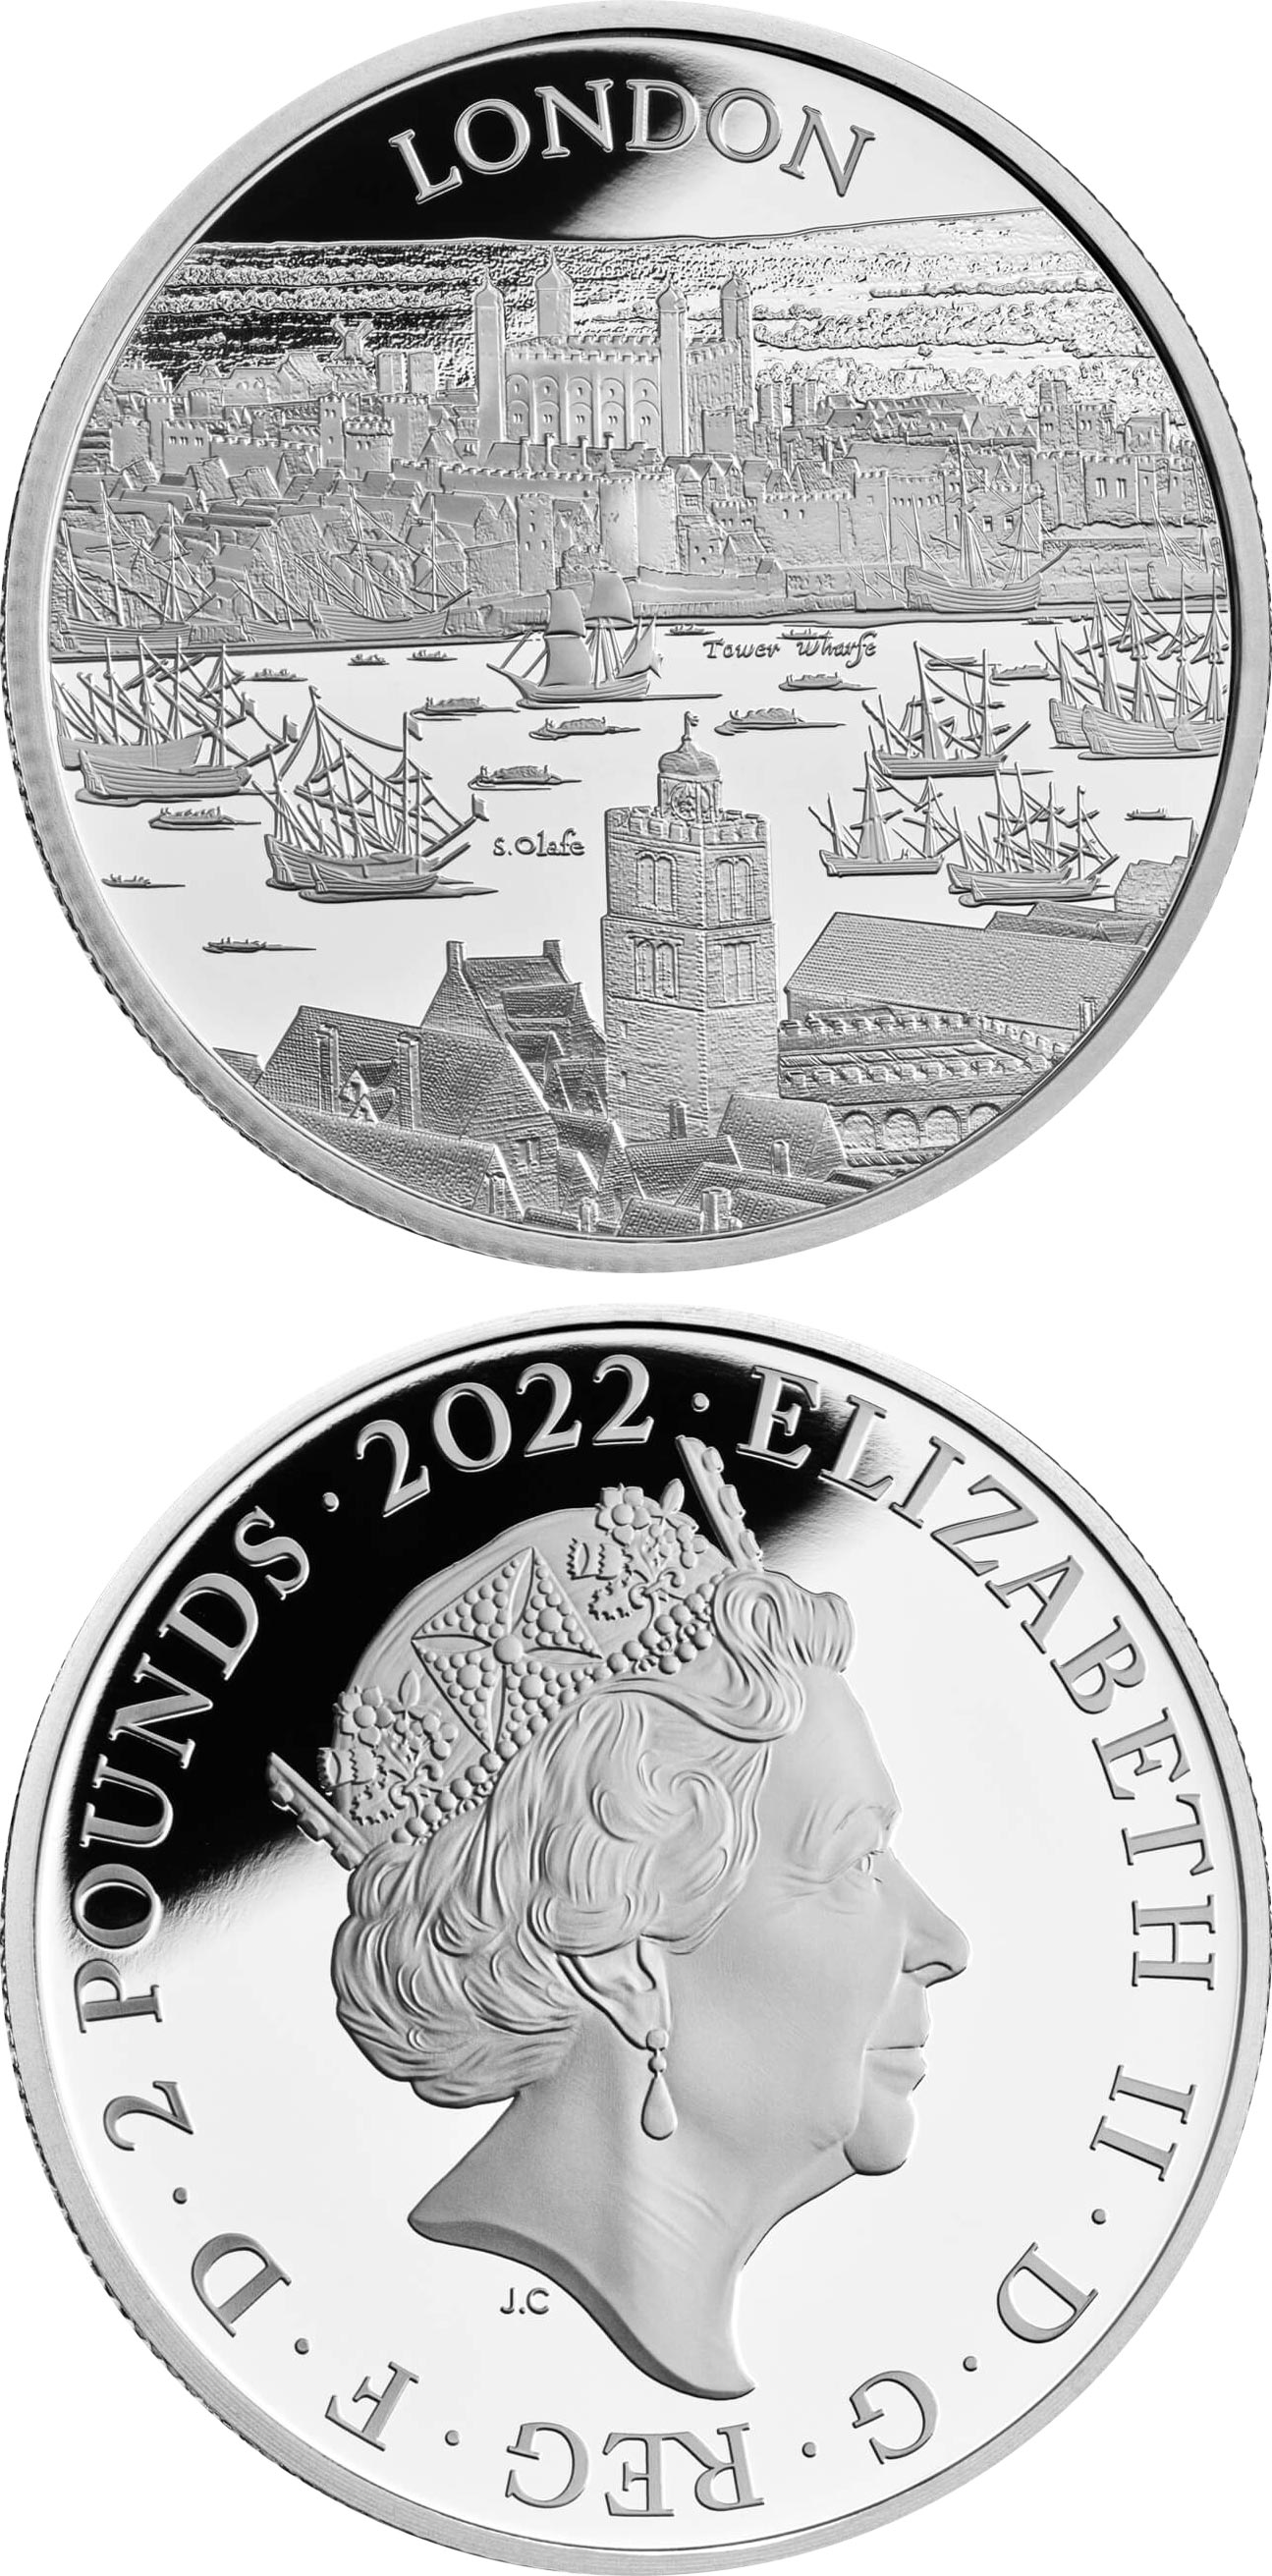 Image of 2 pounds coin - London | United Kingdom 2022.  The Silver coin is of Proof quality.